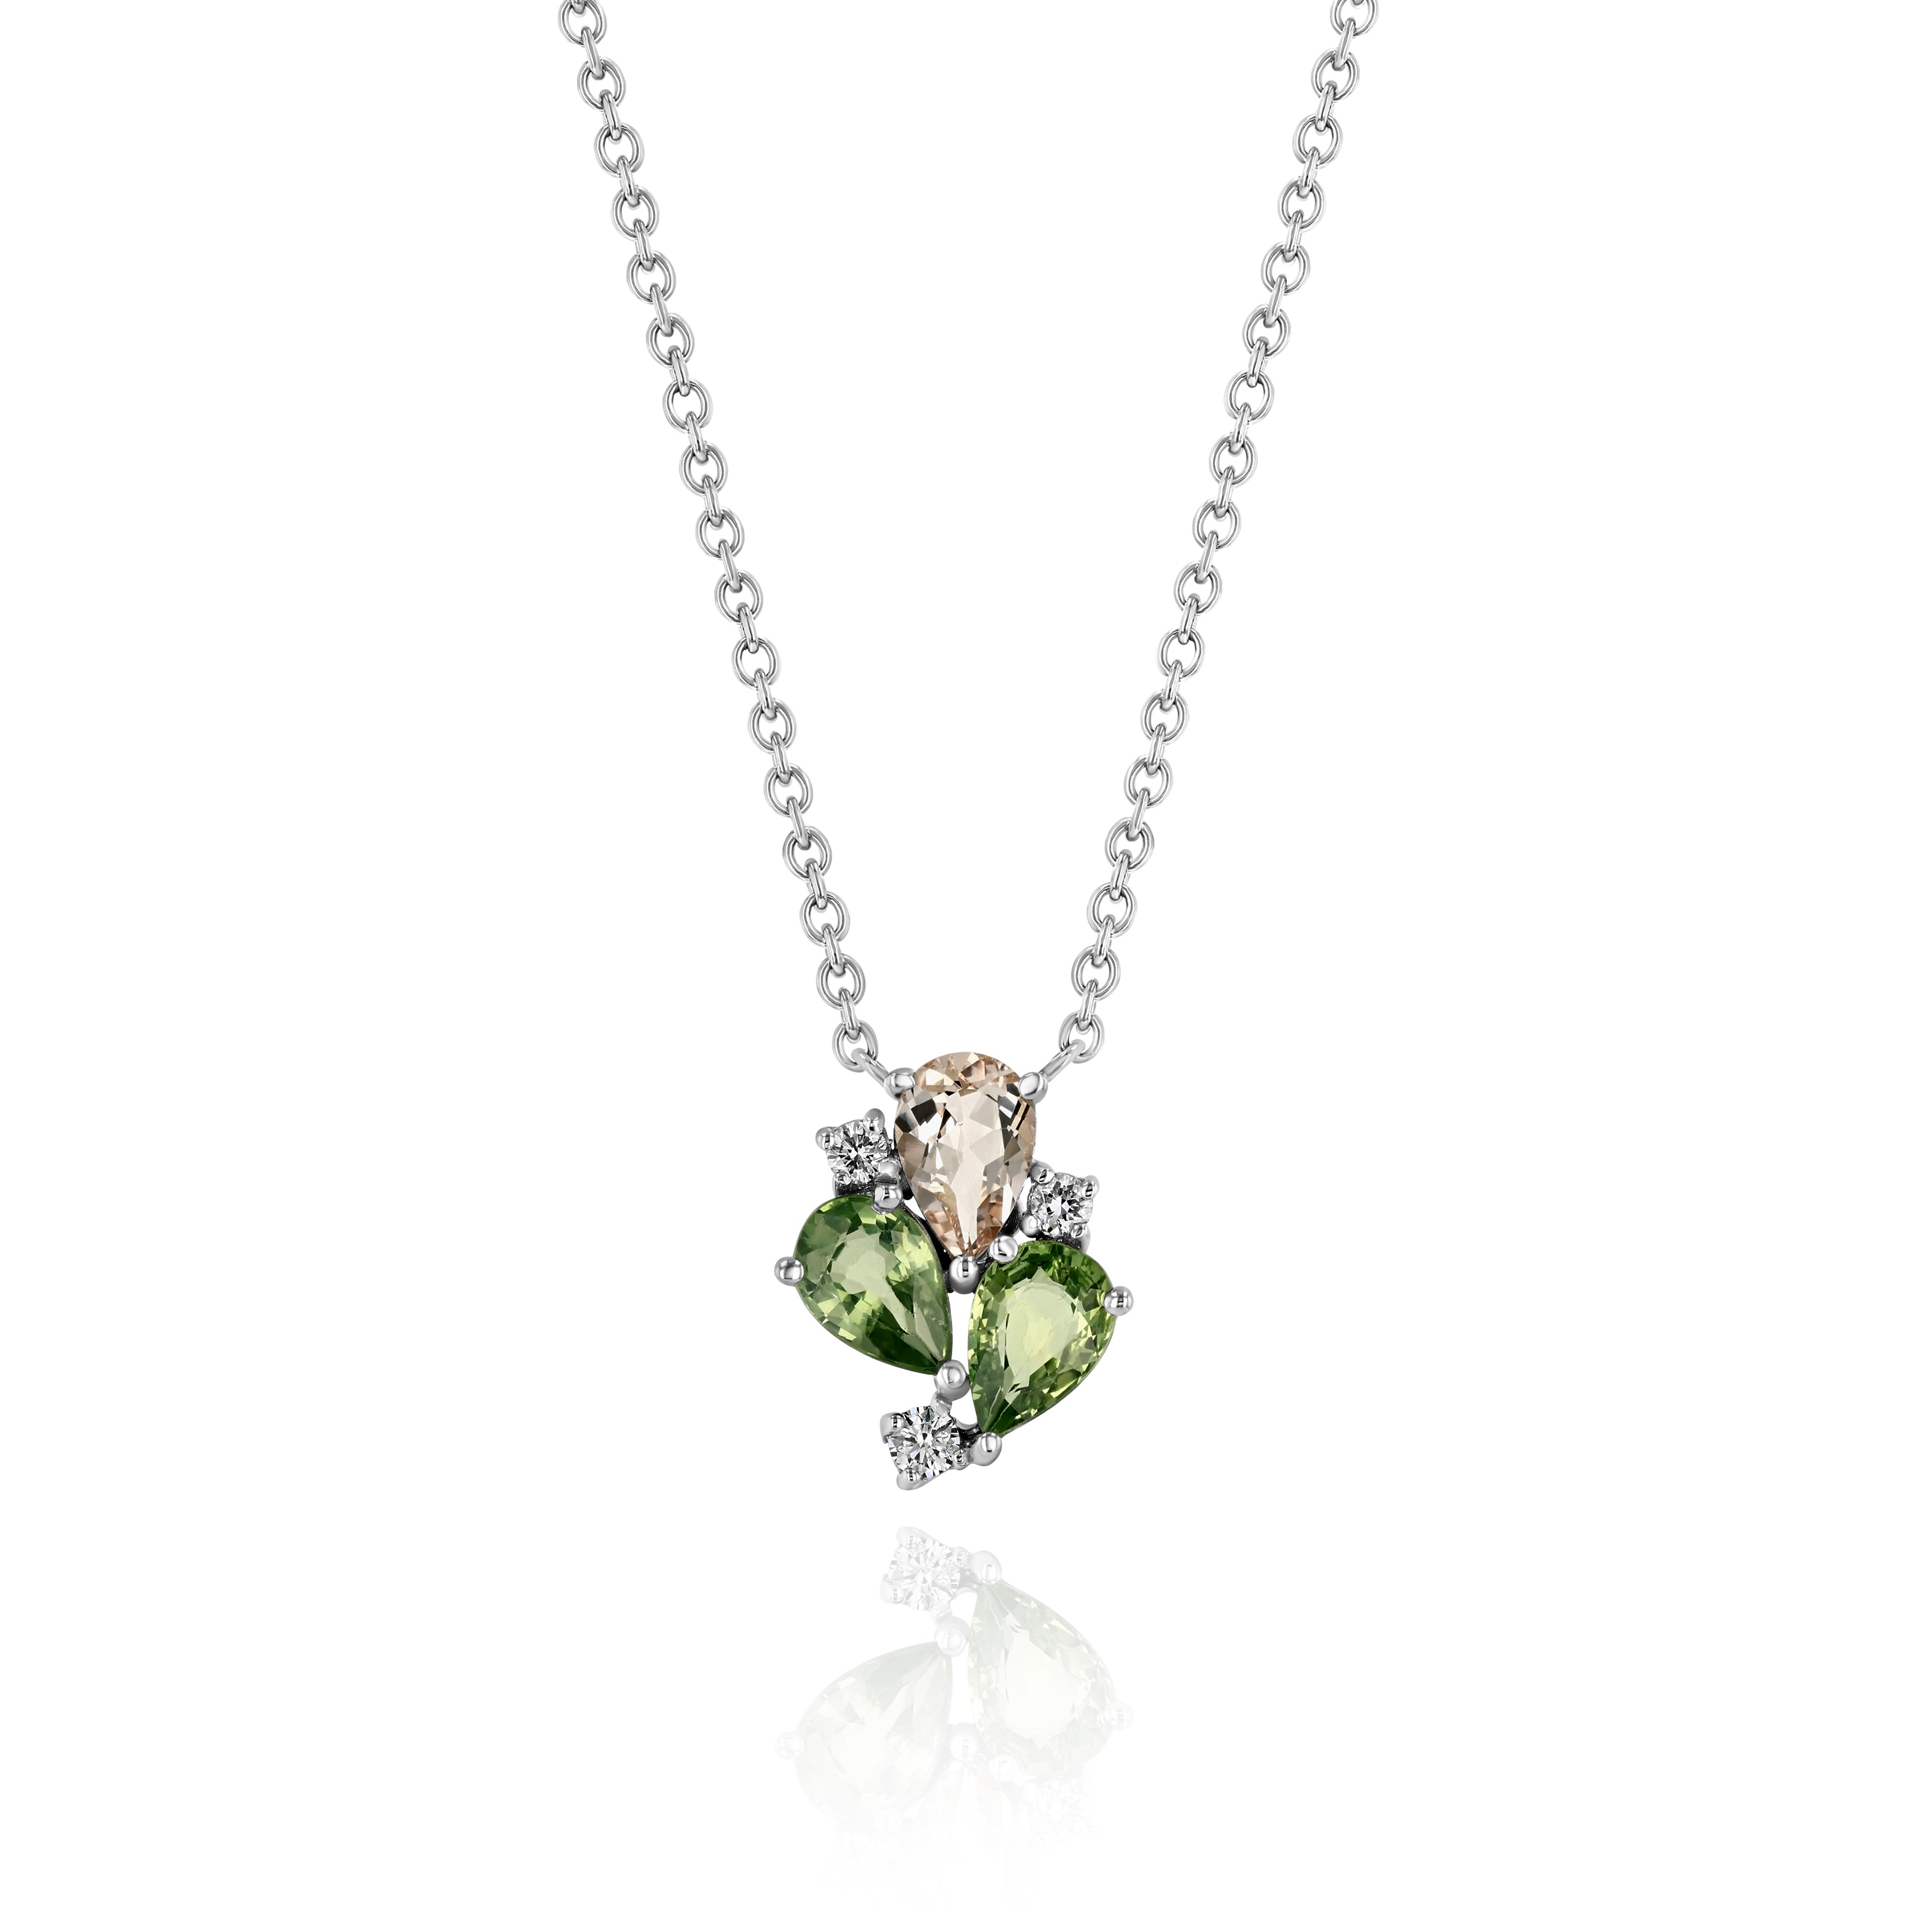 White Gold Necklace with Morganite, Green Sapphire, and Diamonds, Small